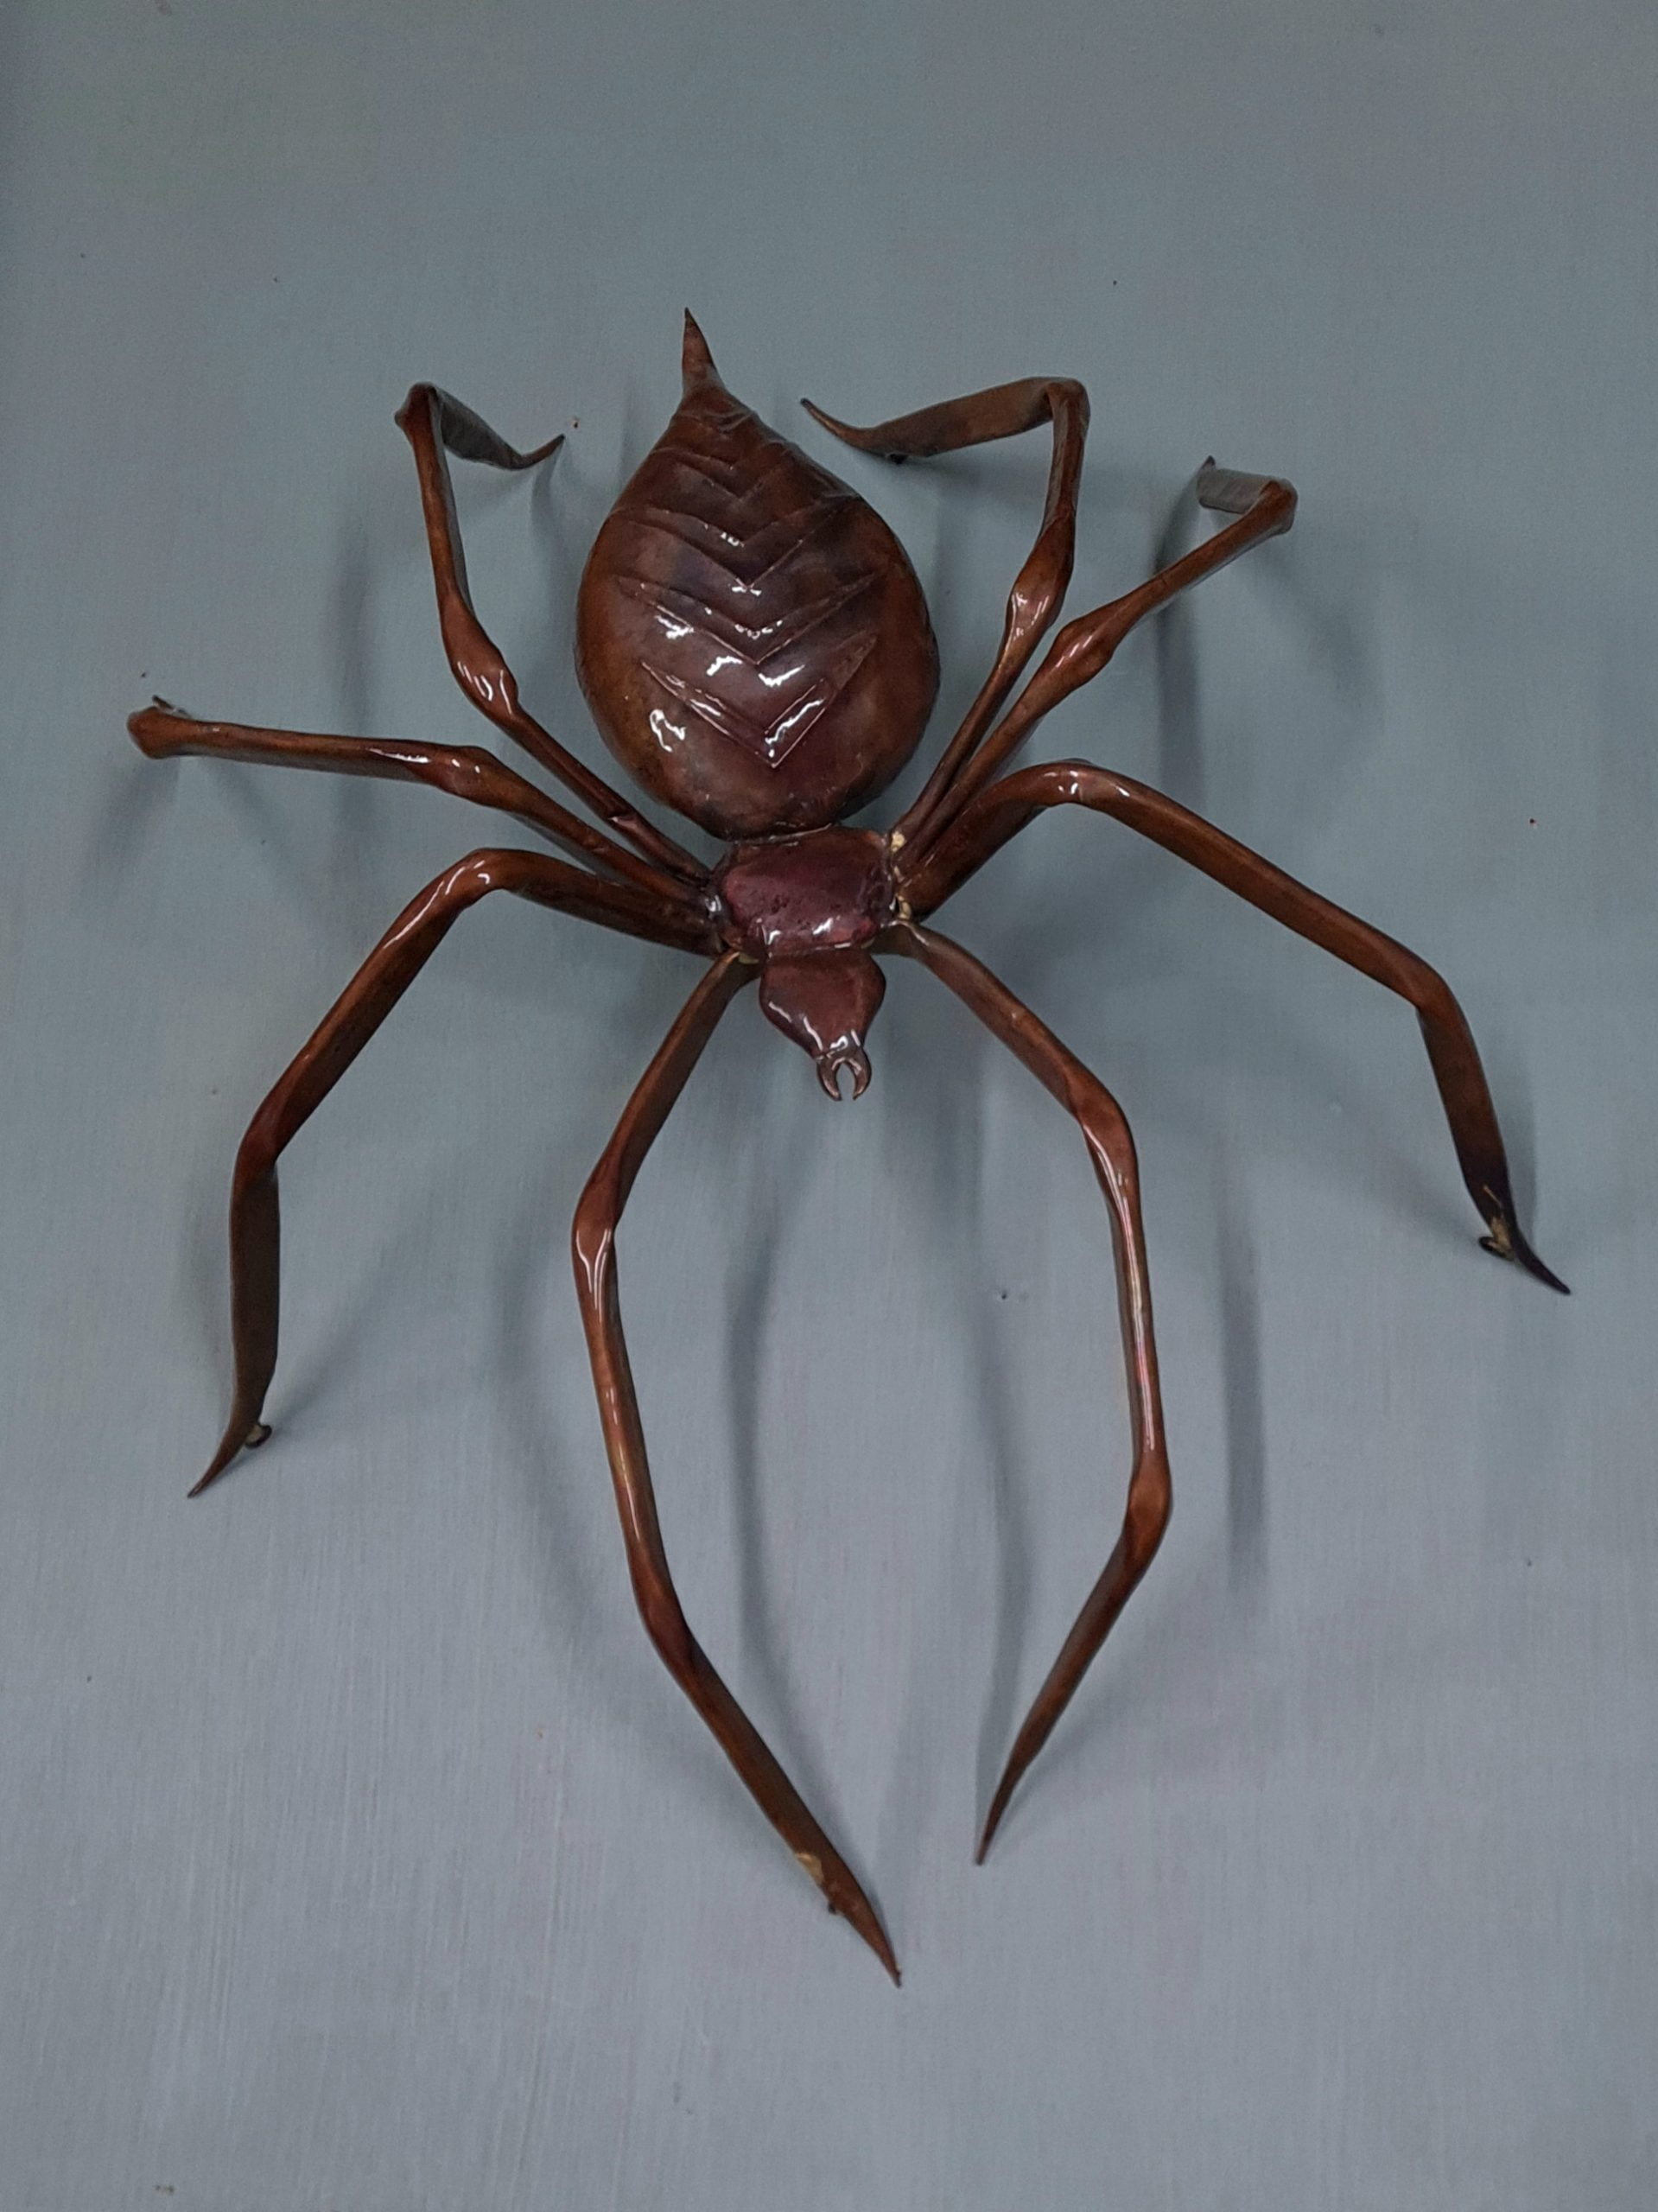 Emily Stone Copper Giant Spider Sculpture